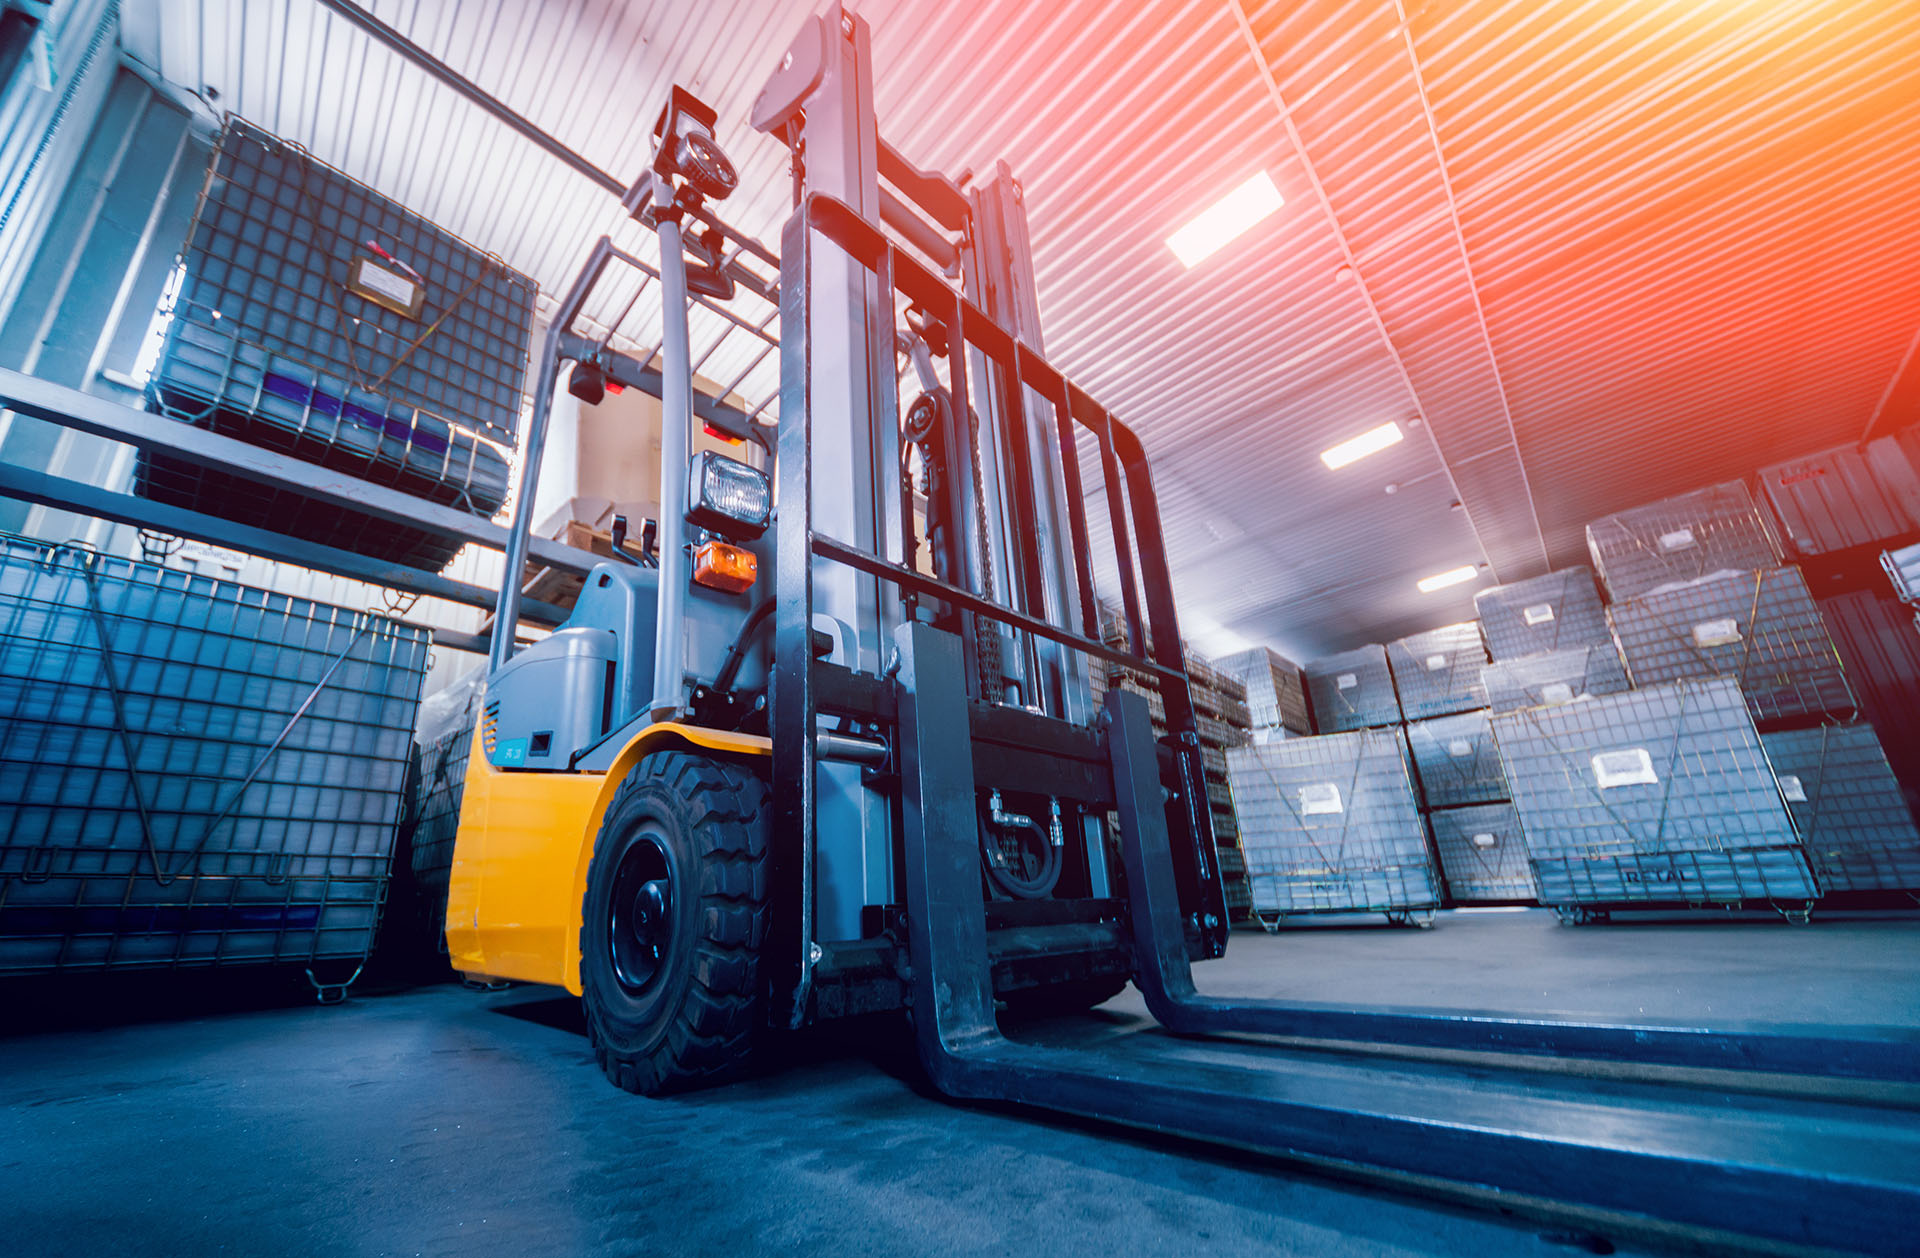 A forklift truck standing in a warehouse